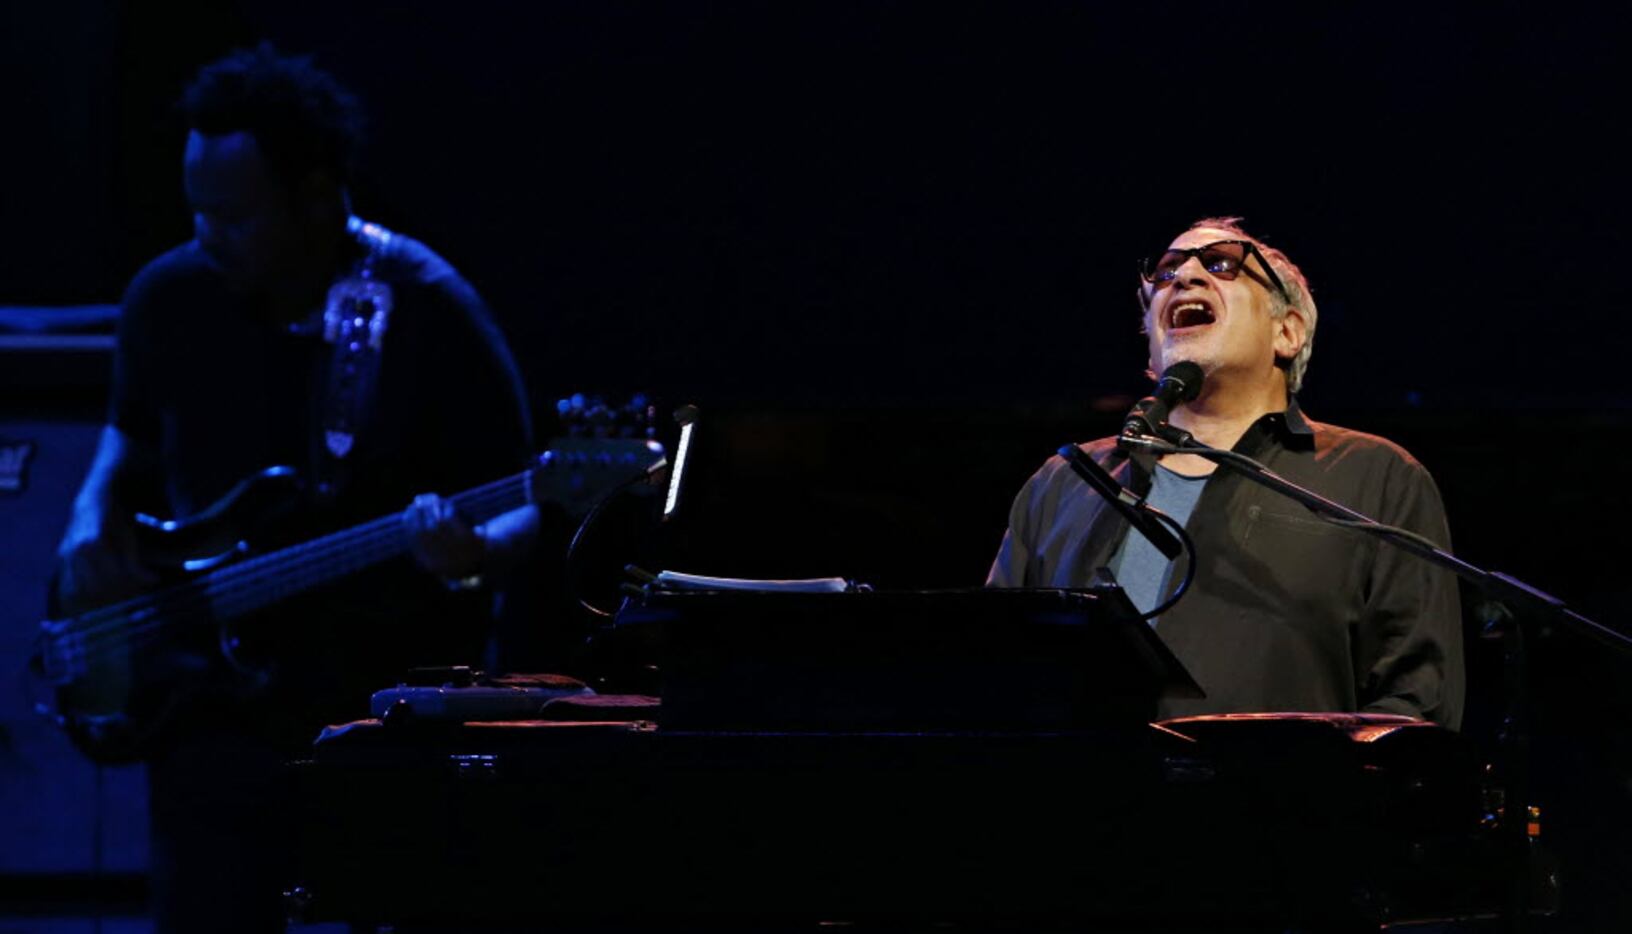 Steely Dan's Donald Fagen, who has always sounded like he looks (All photos by G.J. McCarthy)